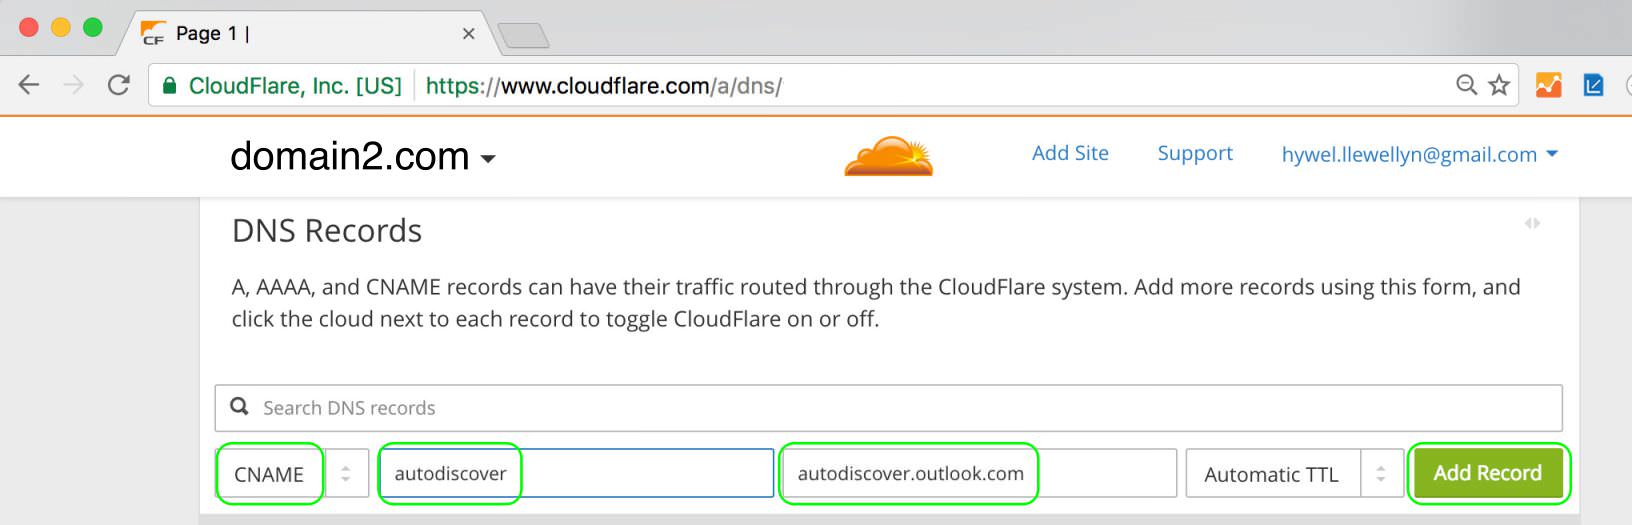 5.2 CloudFlare add a CNAME record for outlook autodiscover as shown remember to click Add Record